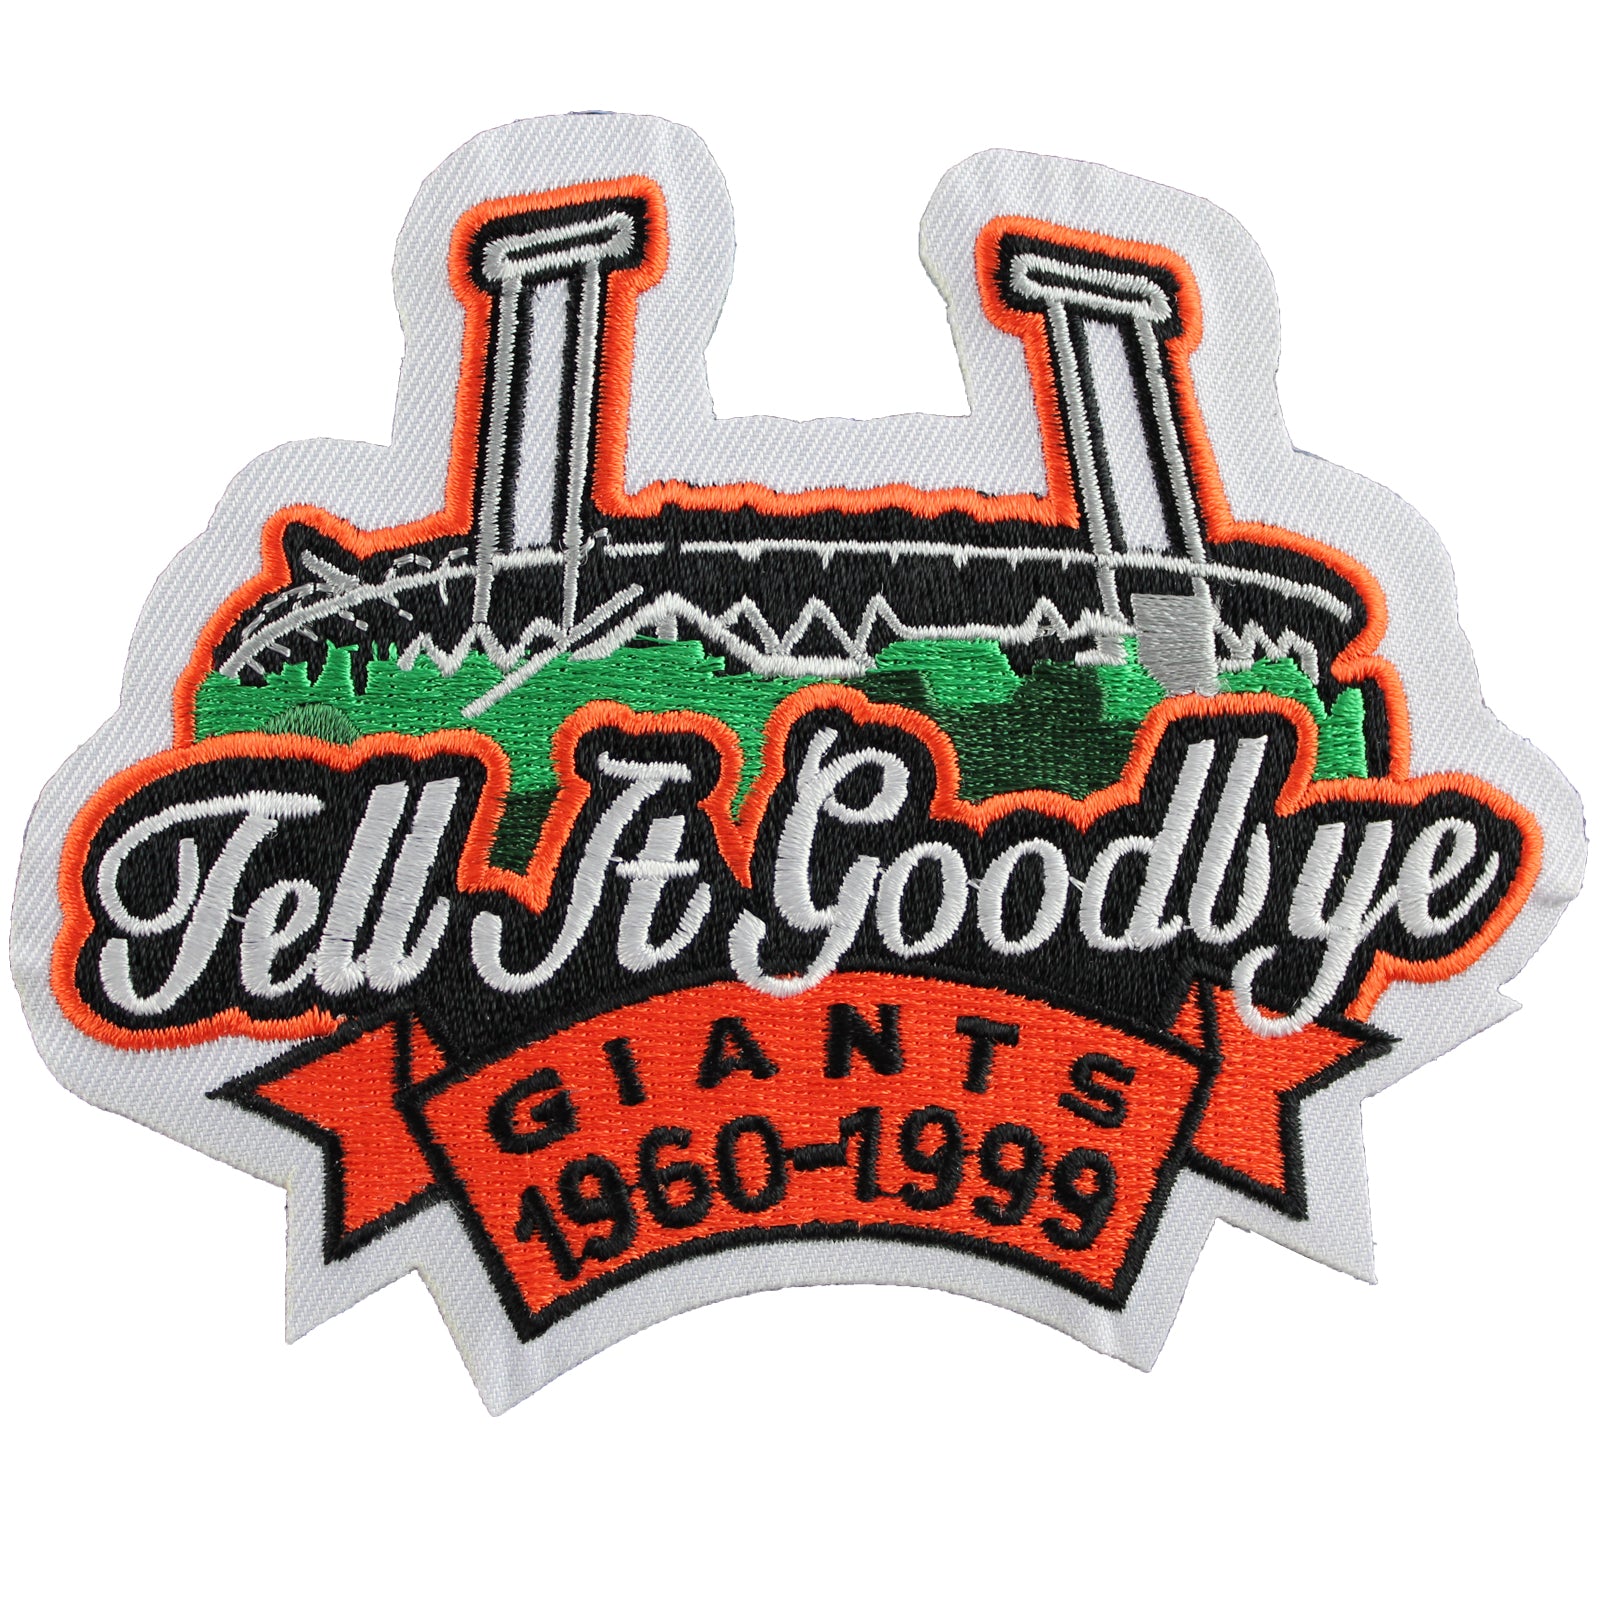 1999 San Francisco Giants Candlestick Park Closing Patch ('Tell It Goodbye') 